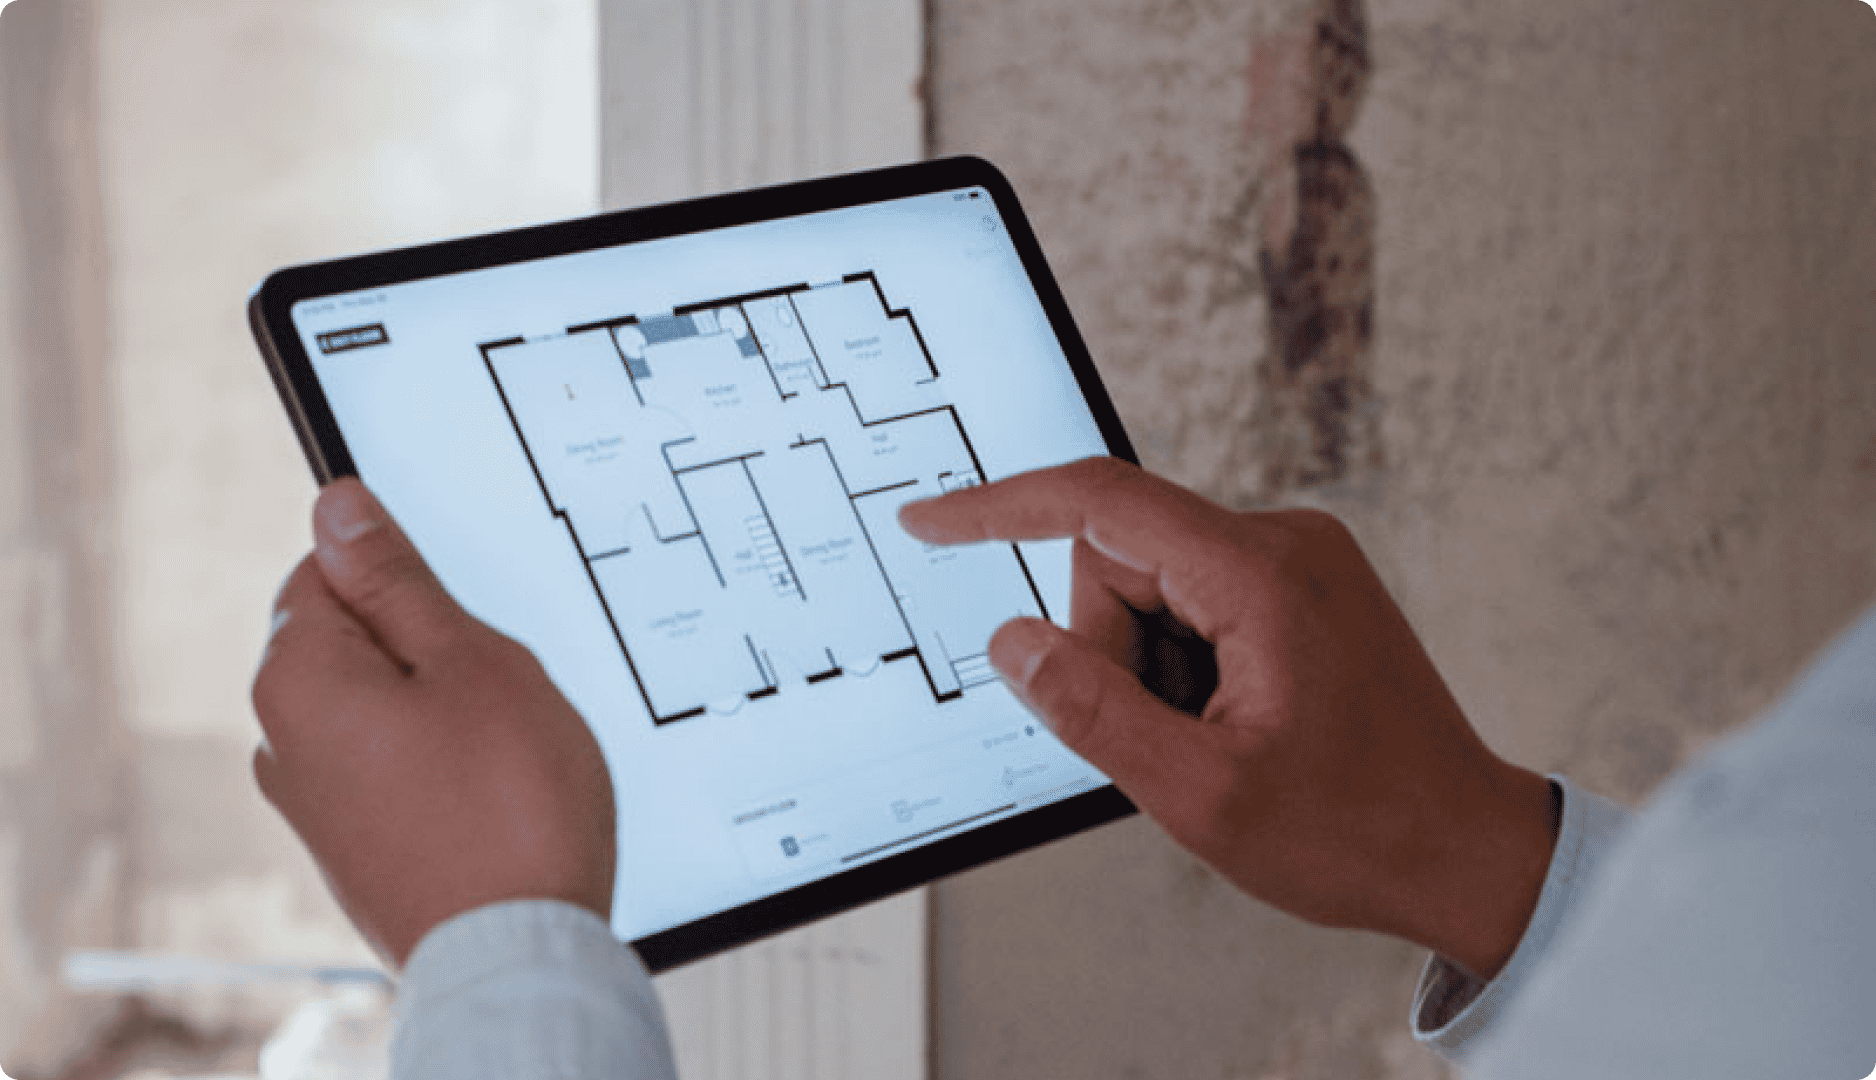 Contractor holding ipad with a magicplan floor plan selecting and modifying rooms